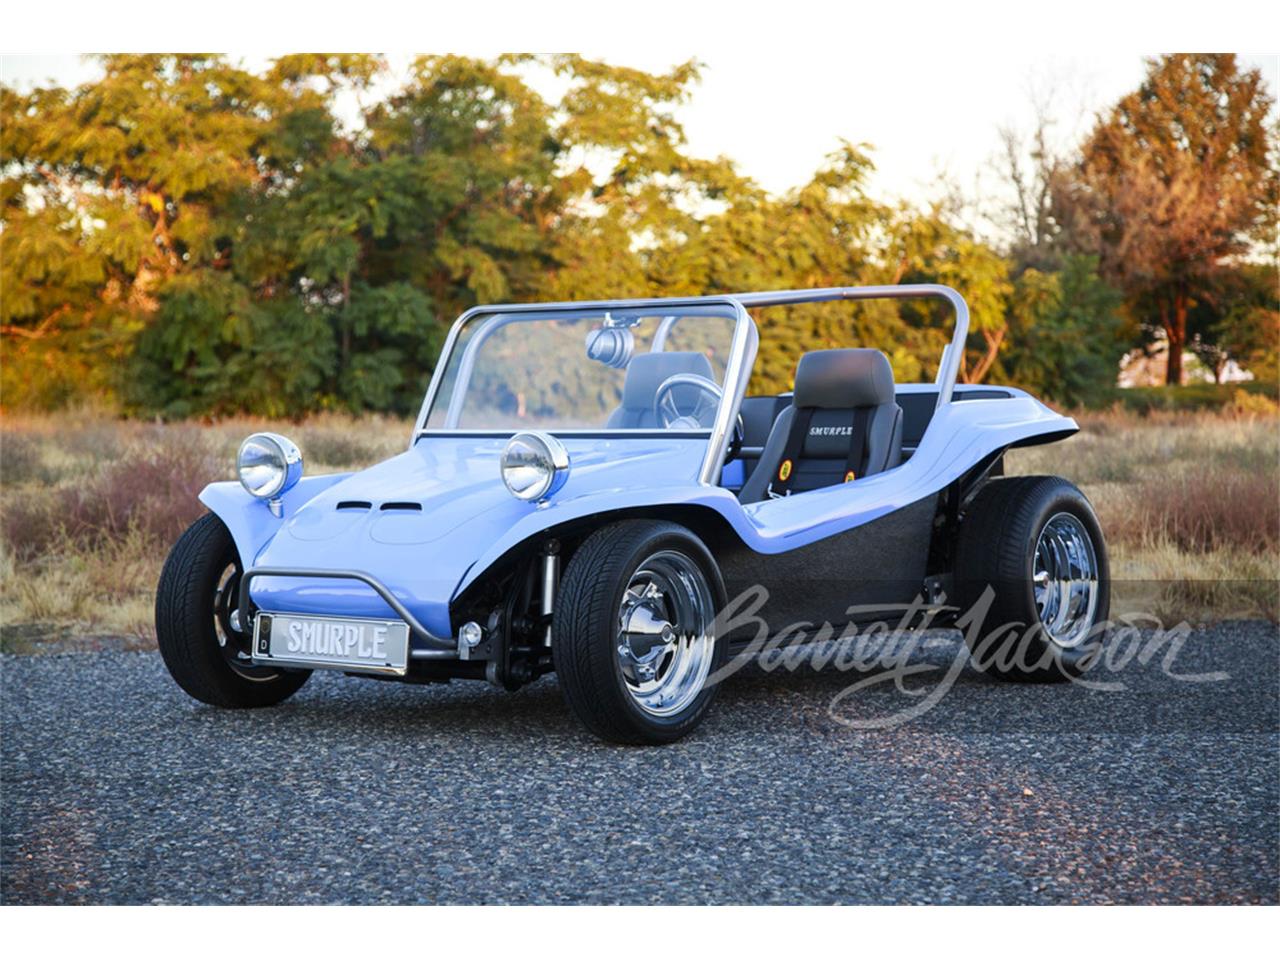 For Sale at Auction: 1962 Volkswagen Dune Buggy in Scottsdale, Arizona for sale in Scottsdale, AZ